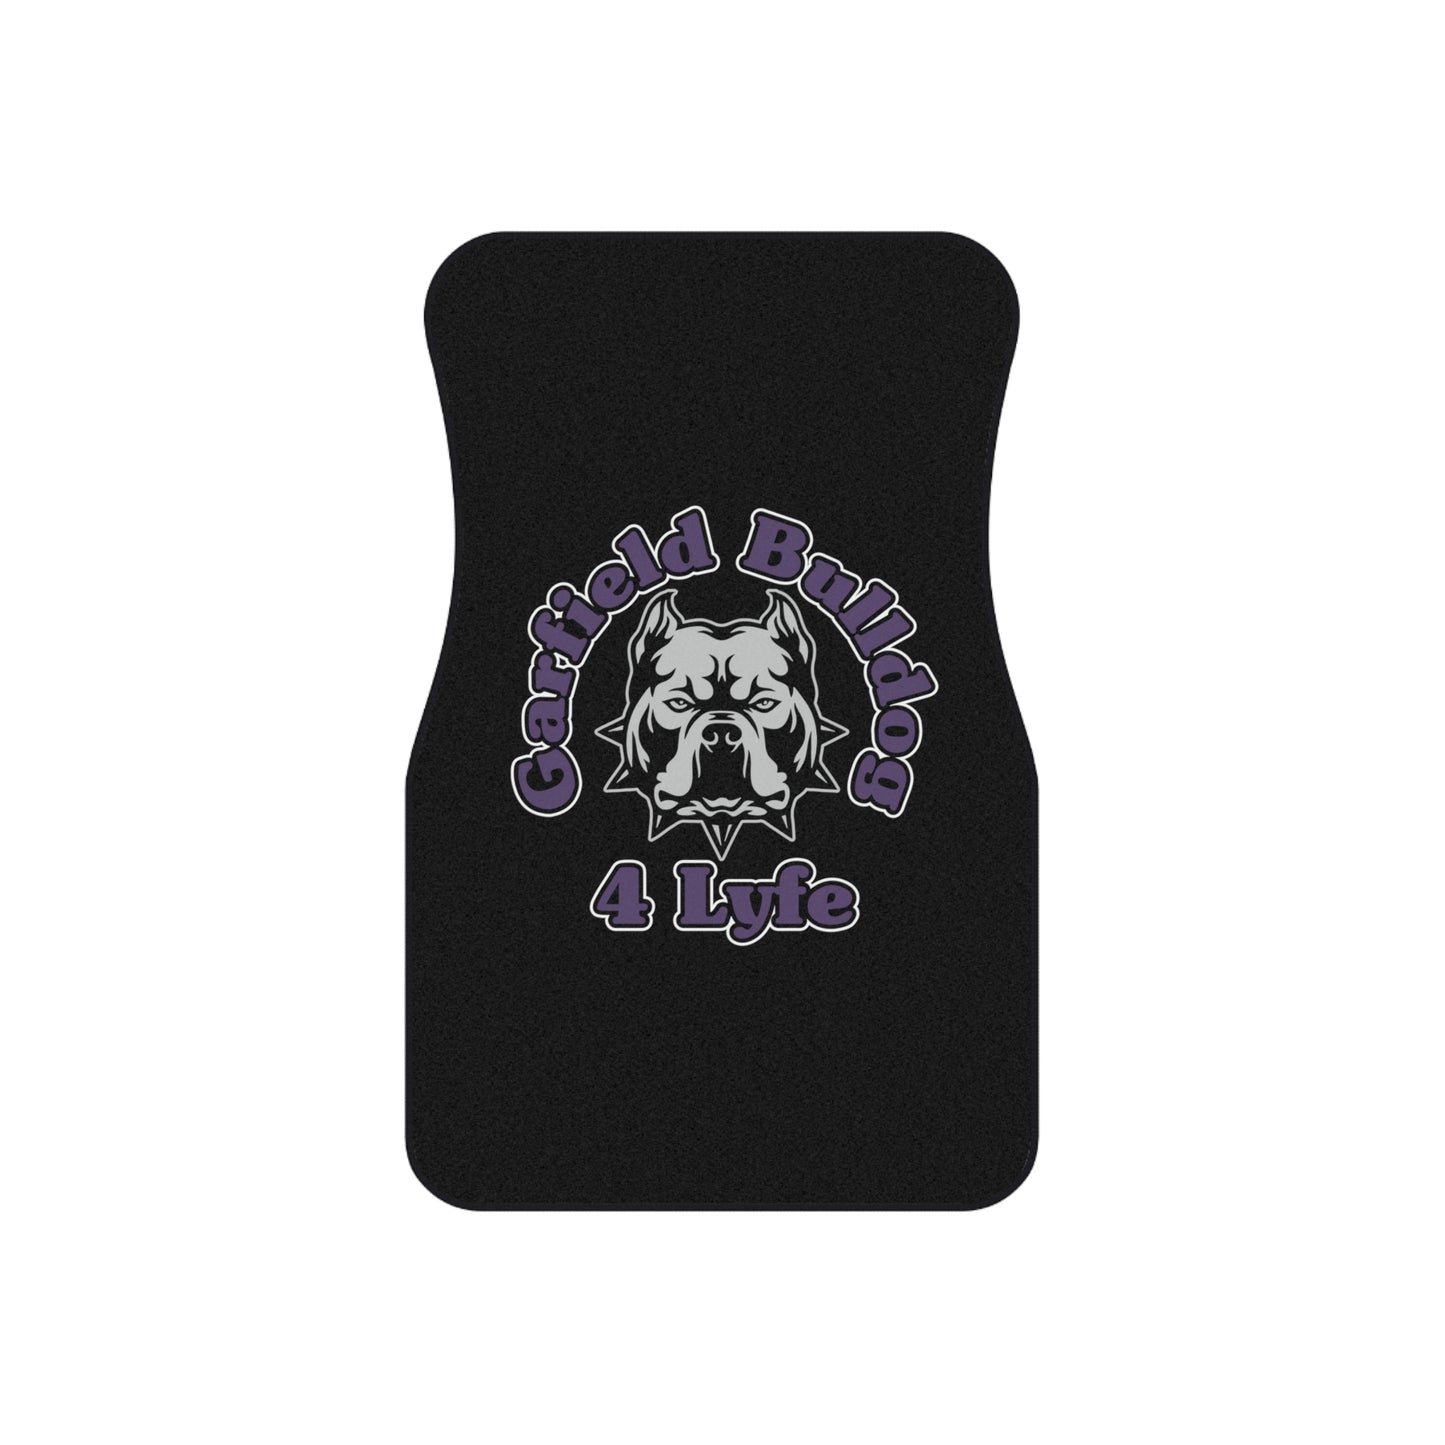 Garfield Bulldog 4 Lyfe Complete Set of Front and Rear Car Mats (Set of 4)